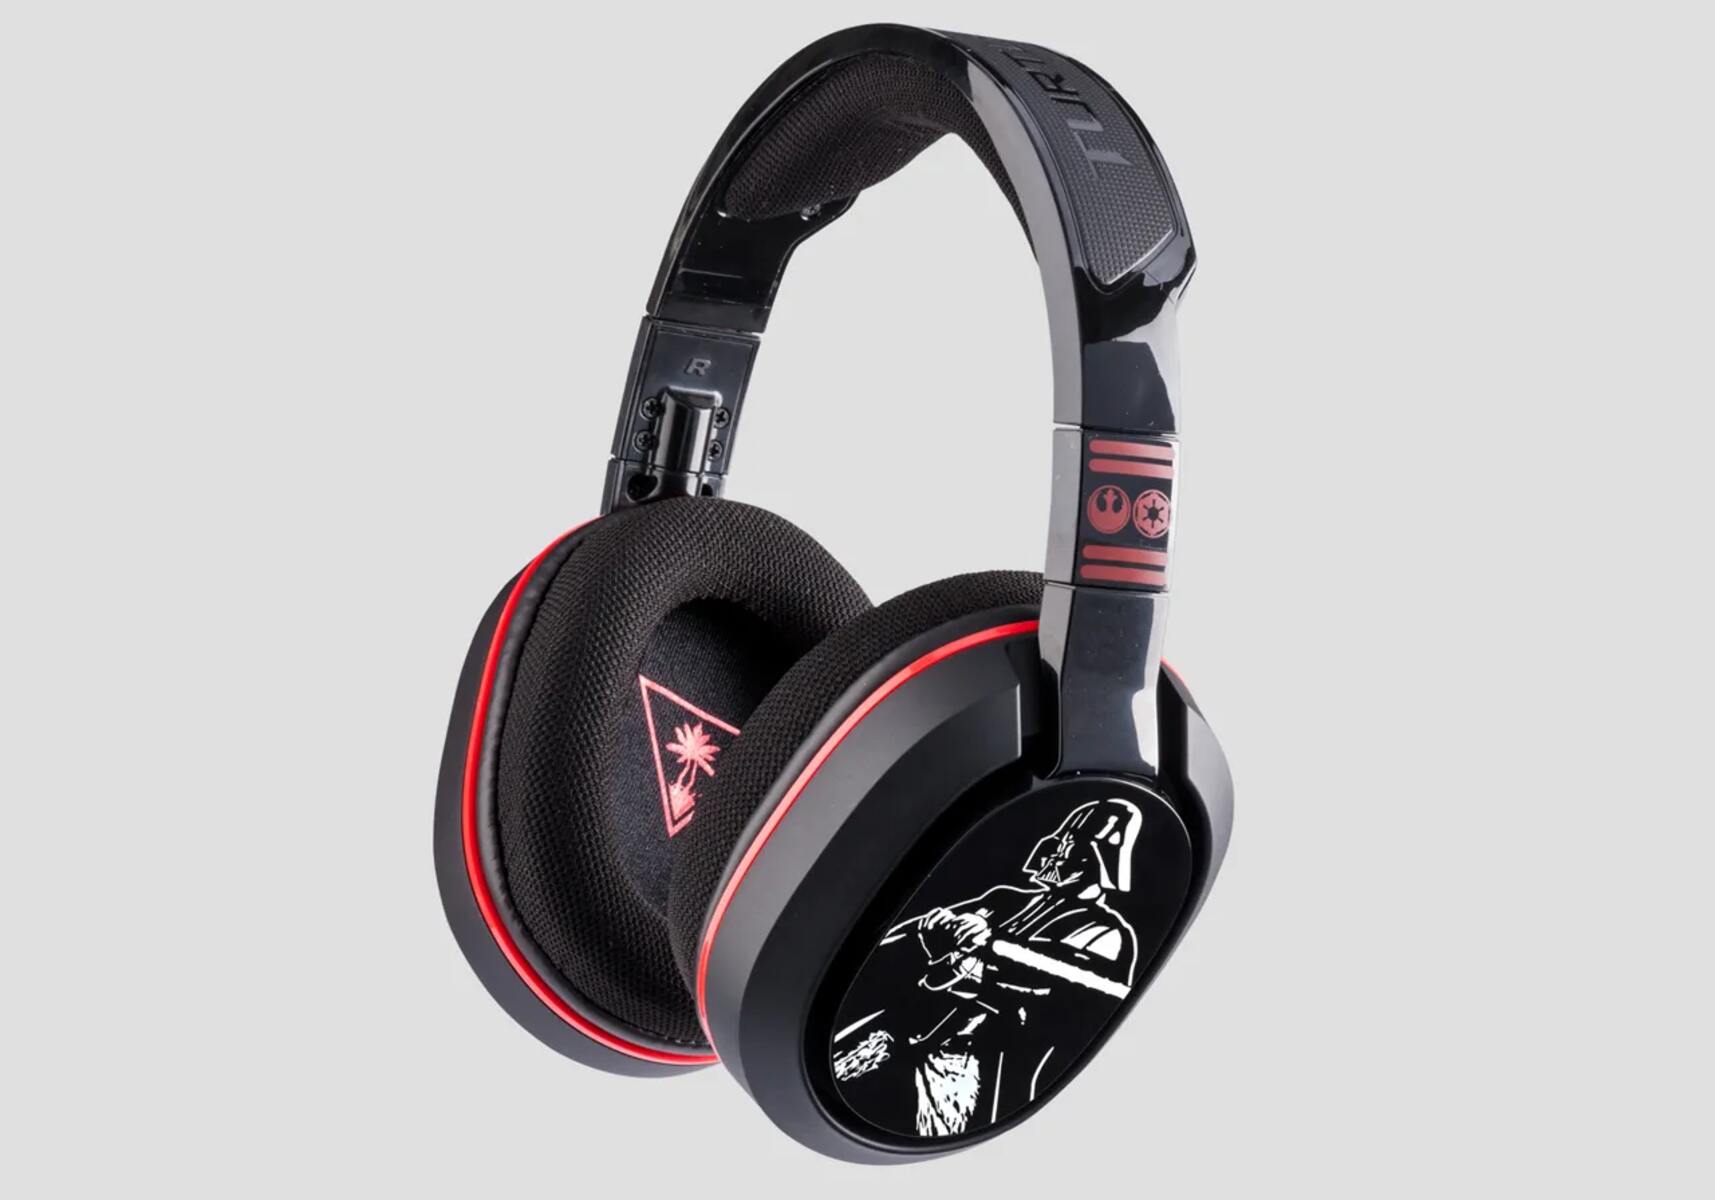 How To Fix Turtle Beach Ear Force Star Wars Gaming Headset For PC And Mobile Devices